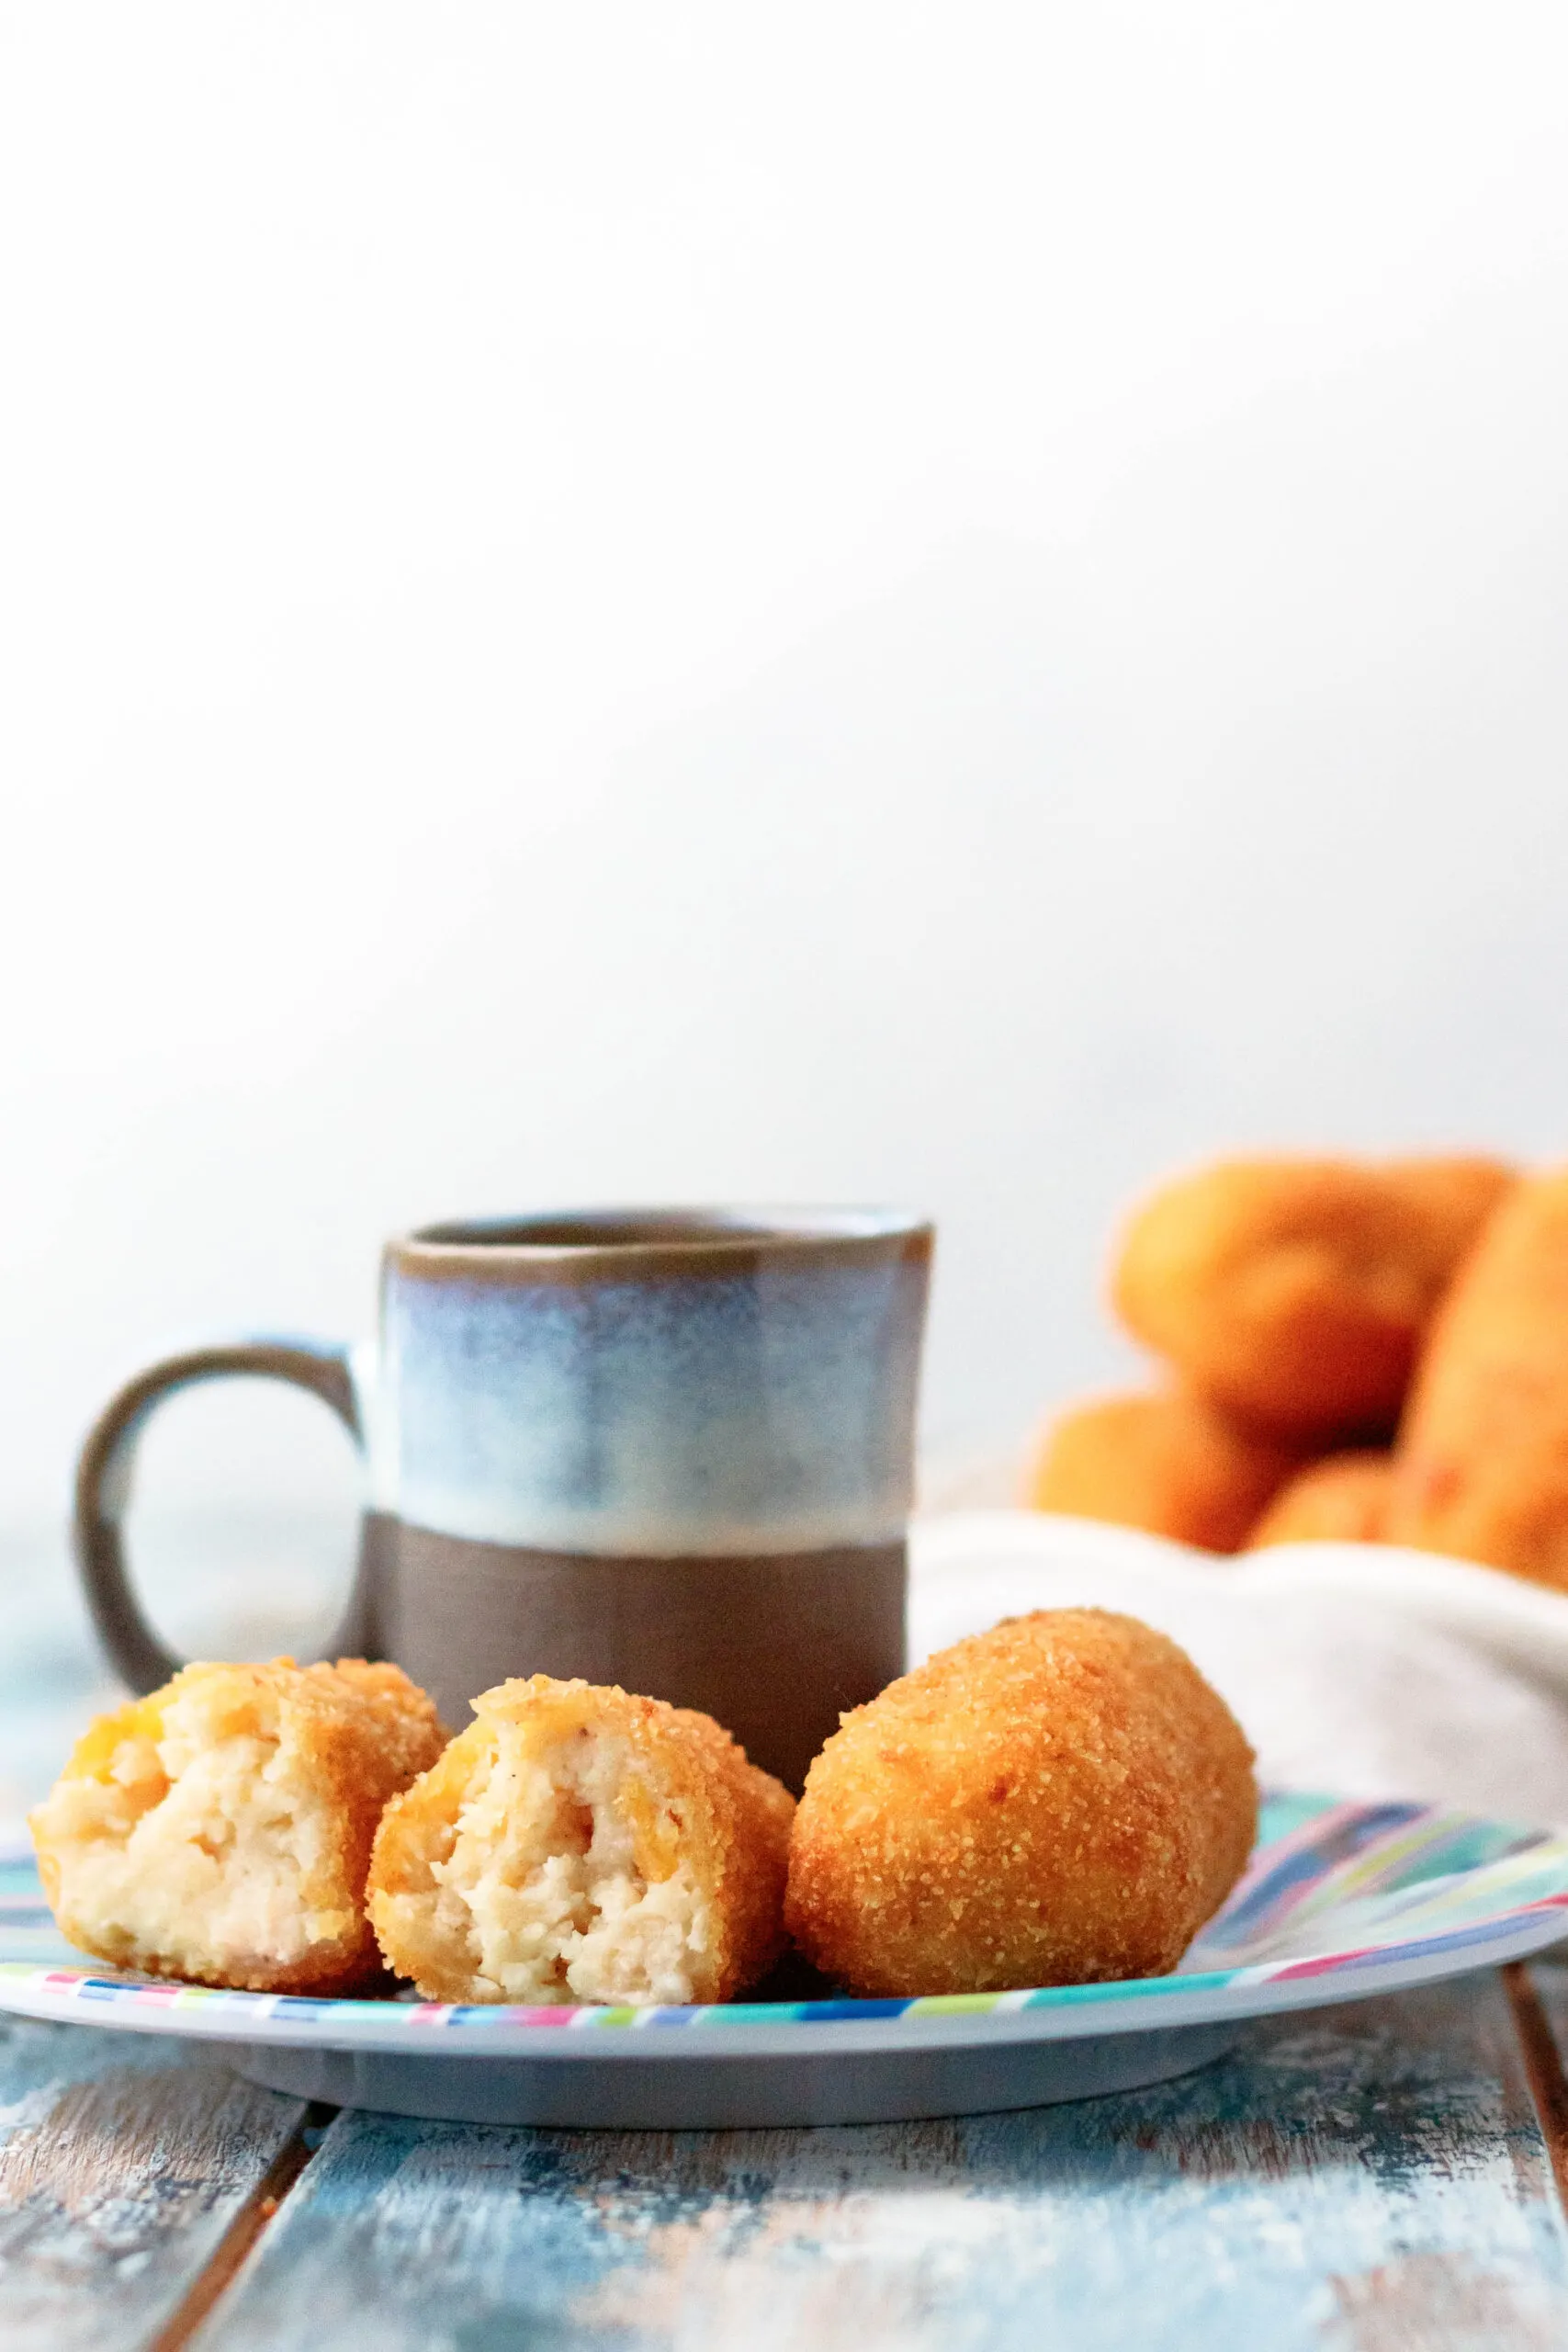 straight on view of the plated croquetas with coffee